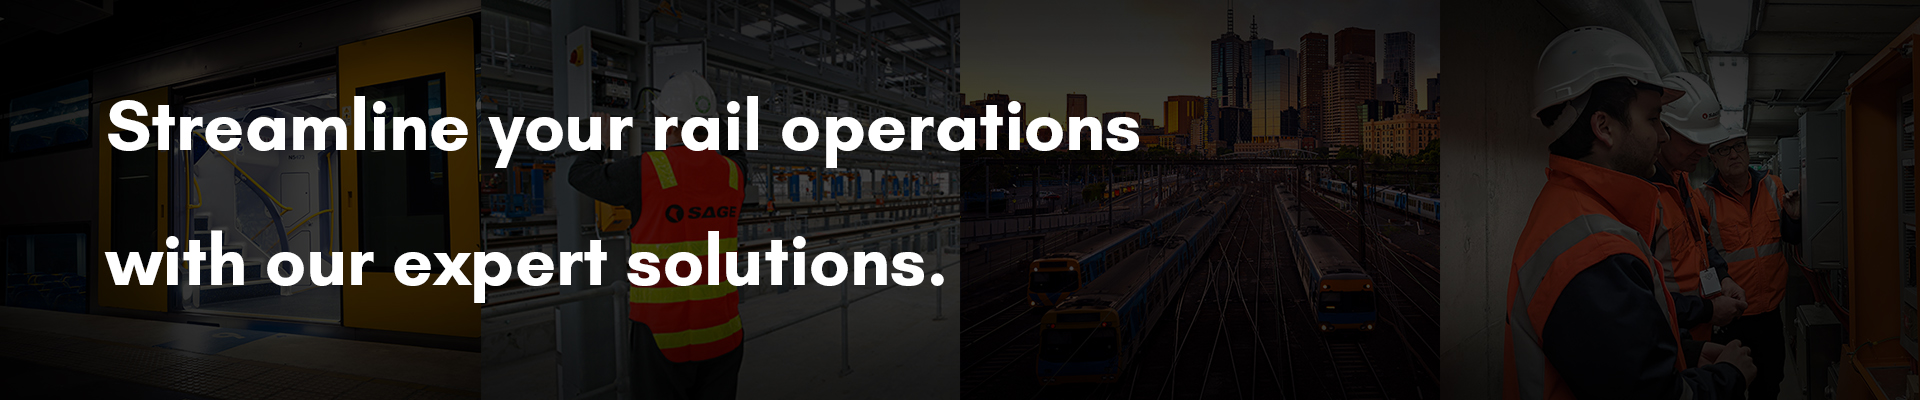 Streamline your rail operations with our expert solutions.